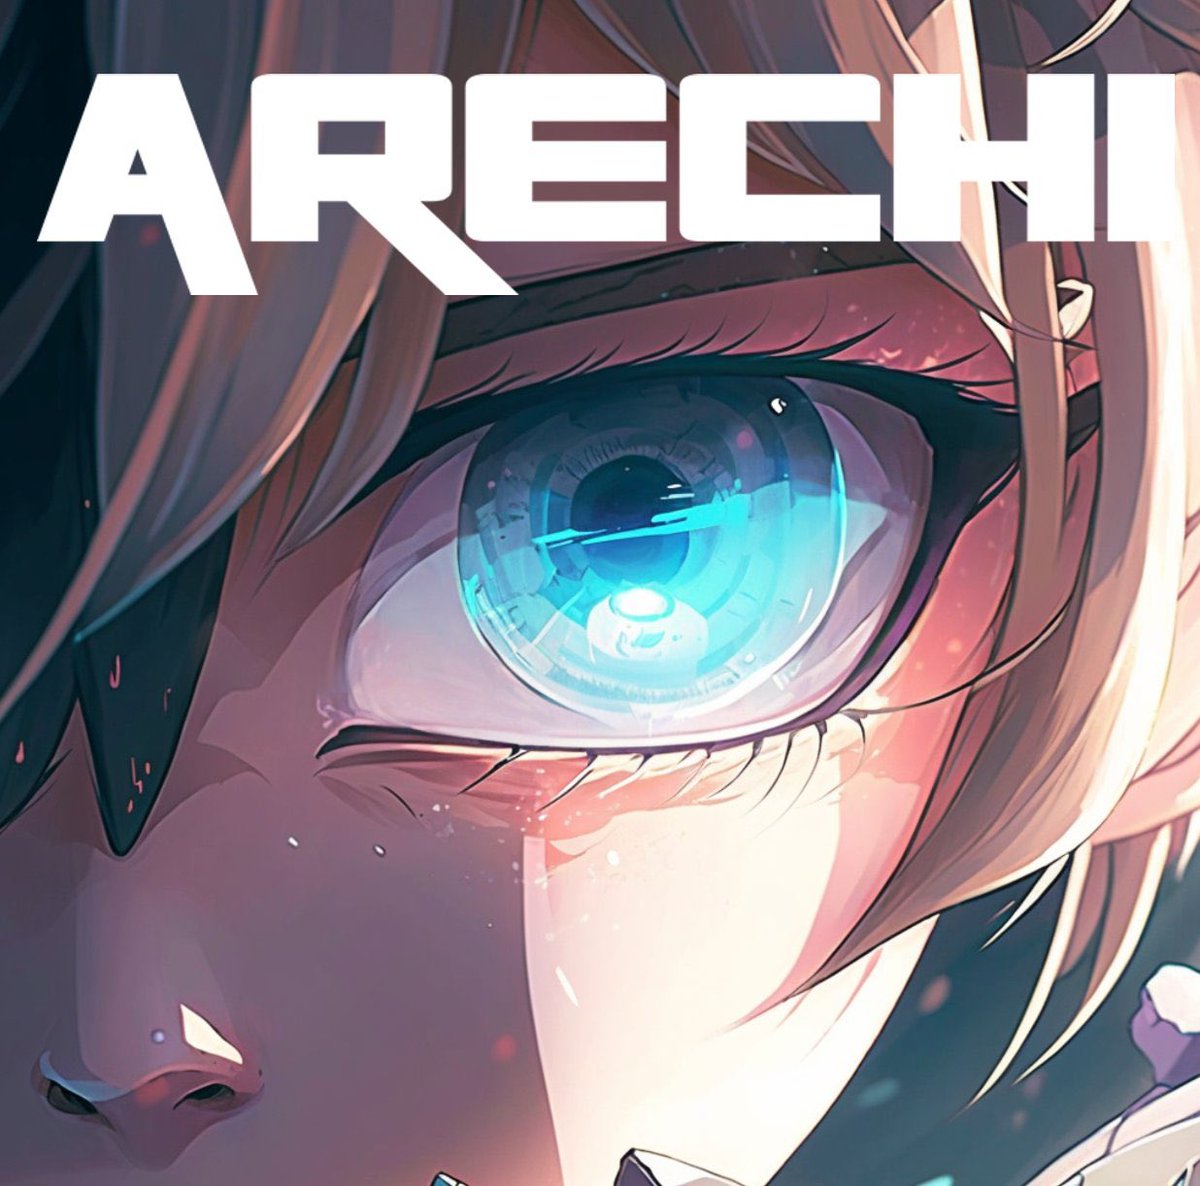 ArechiNFT is a collection of Mech drivers ready to take on the barren wasteland, combining seinin anime with a hi-tech aesthetic 🌟

We are giving away:

🎁 3x WL 

To Enter: 

✅Like & RT
✅Follow me

Good luck 
#Giveaway #NFTGiveaway #NFT #Trending #Crypto